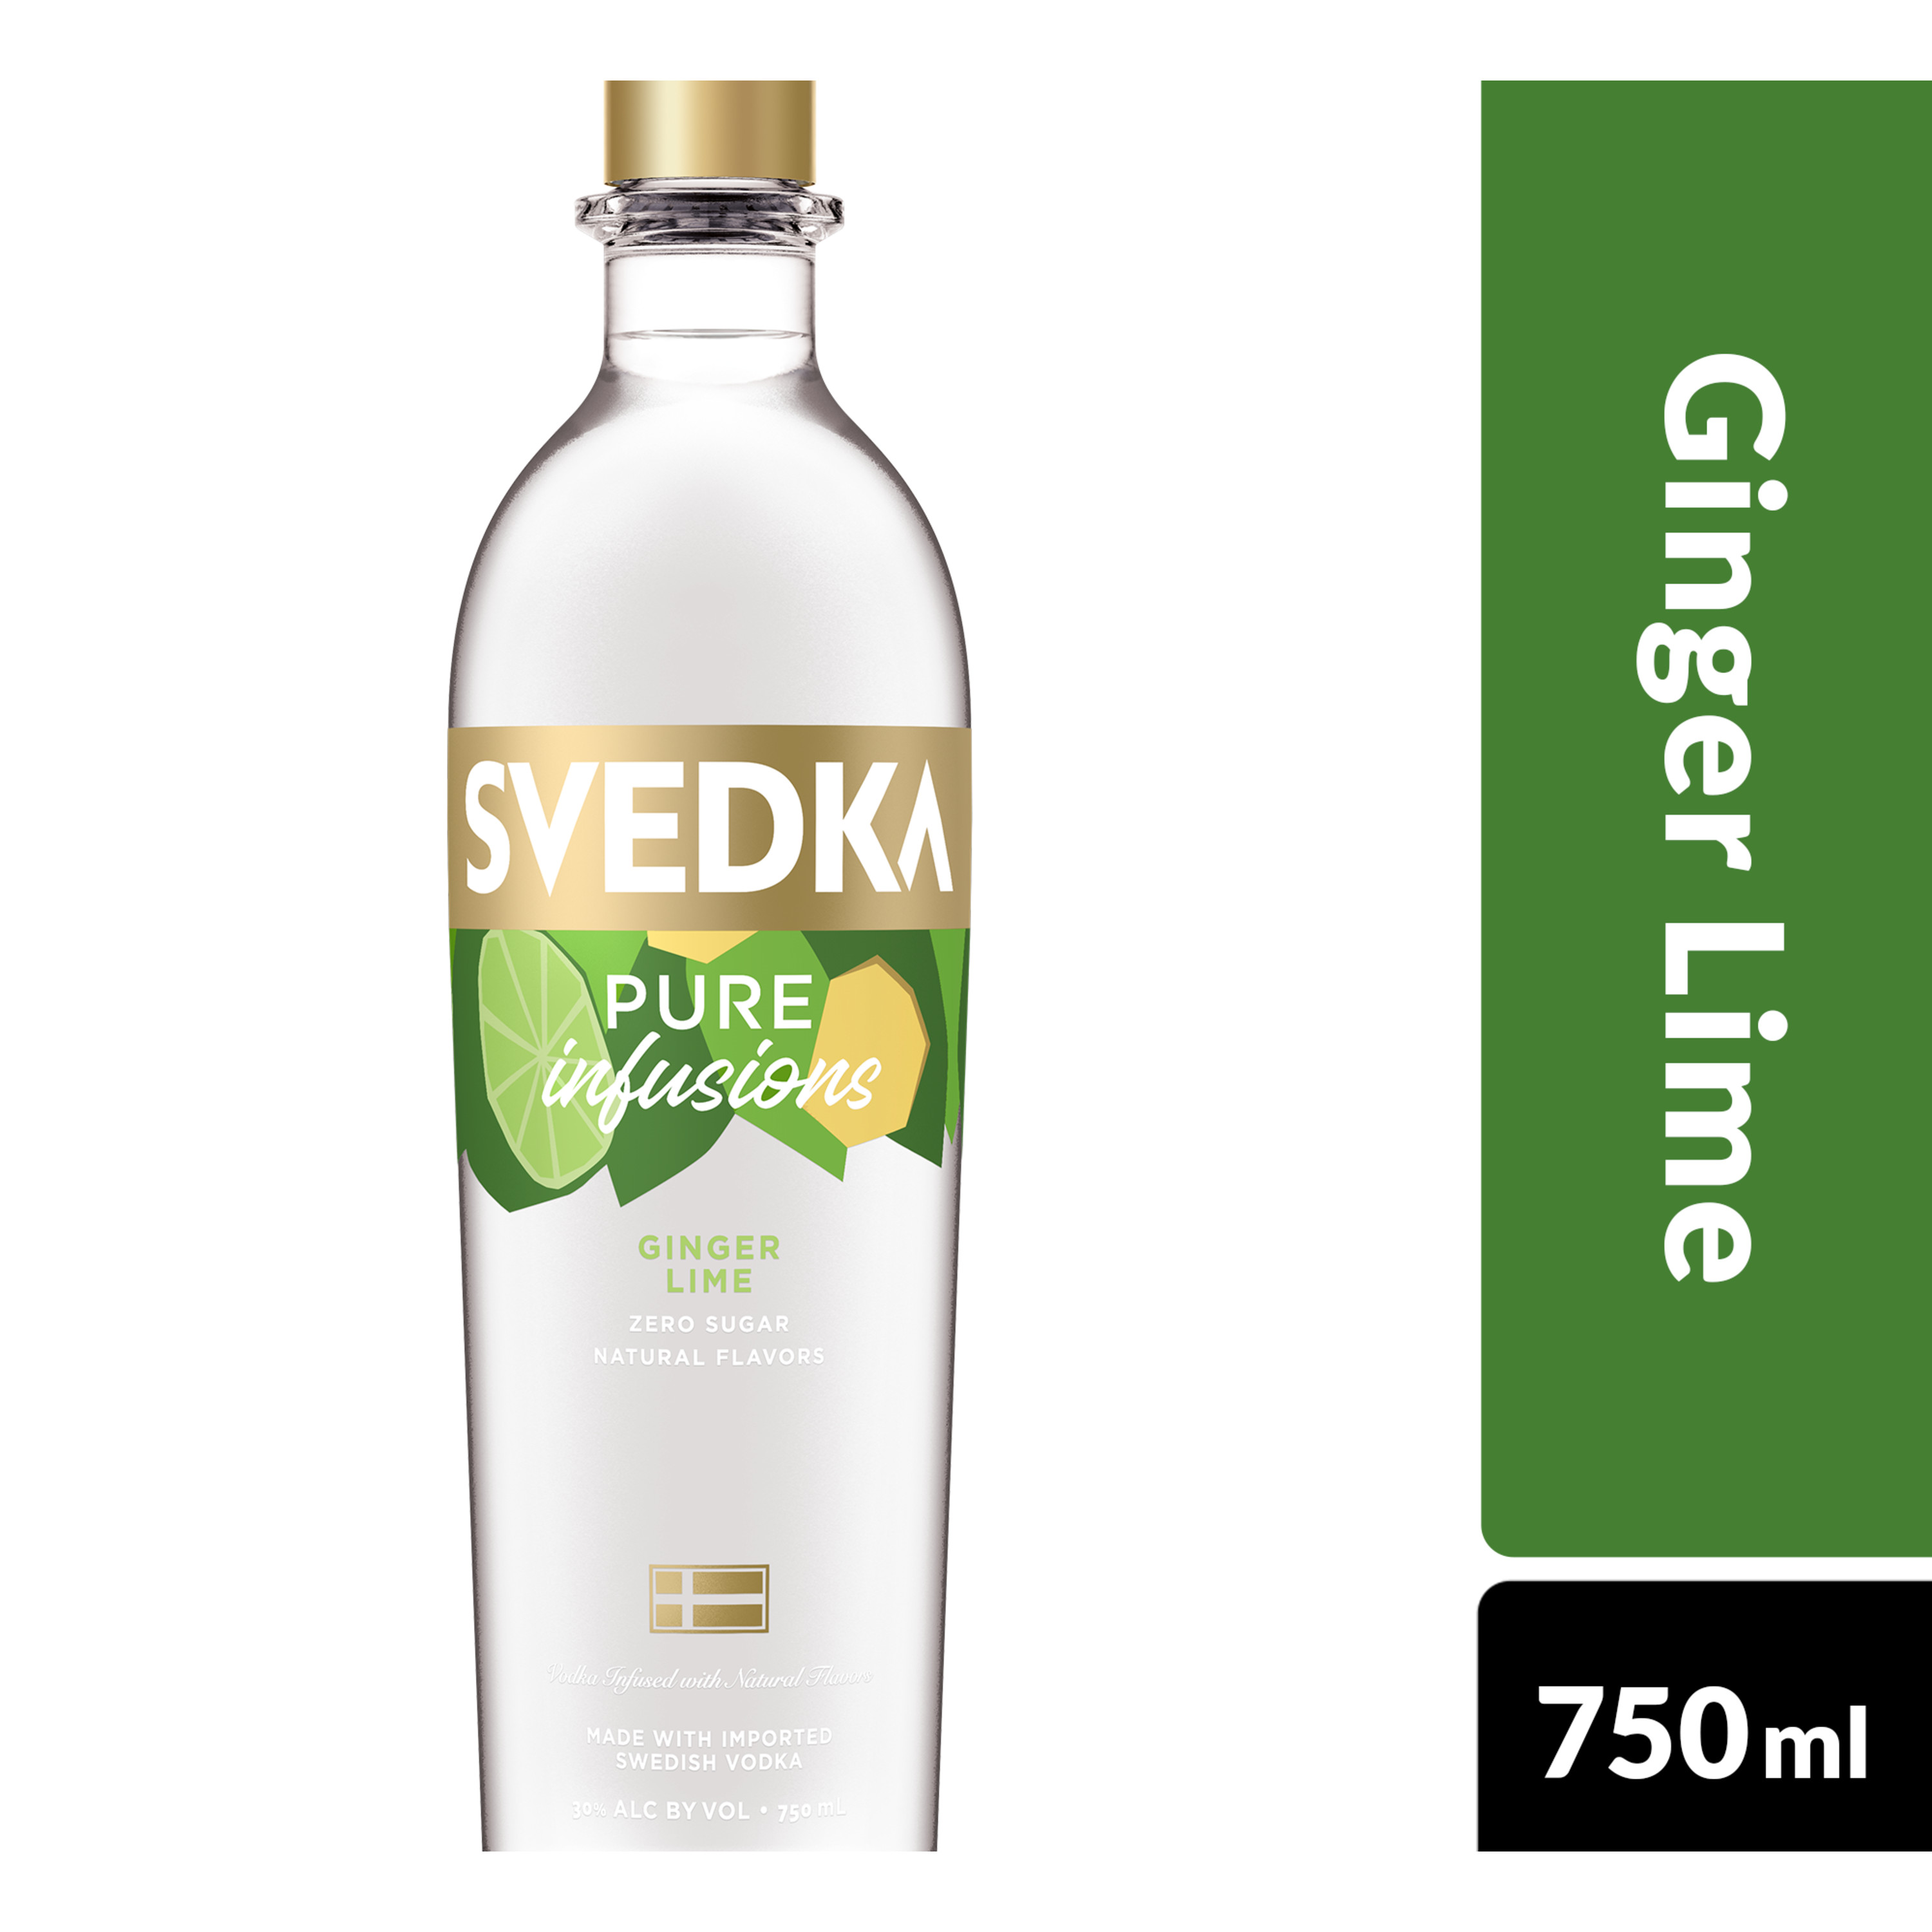 Svedka Pure Infusions Ginger Lime Flavored Vodka Ml Bottle